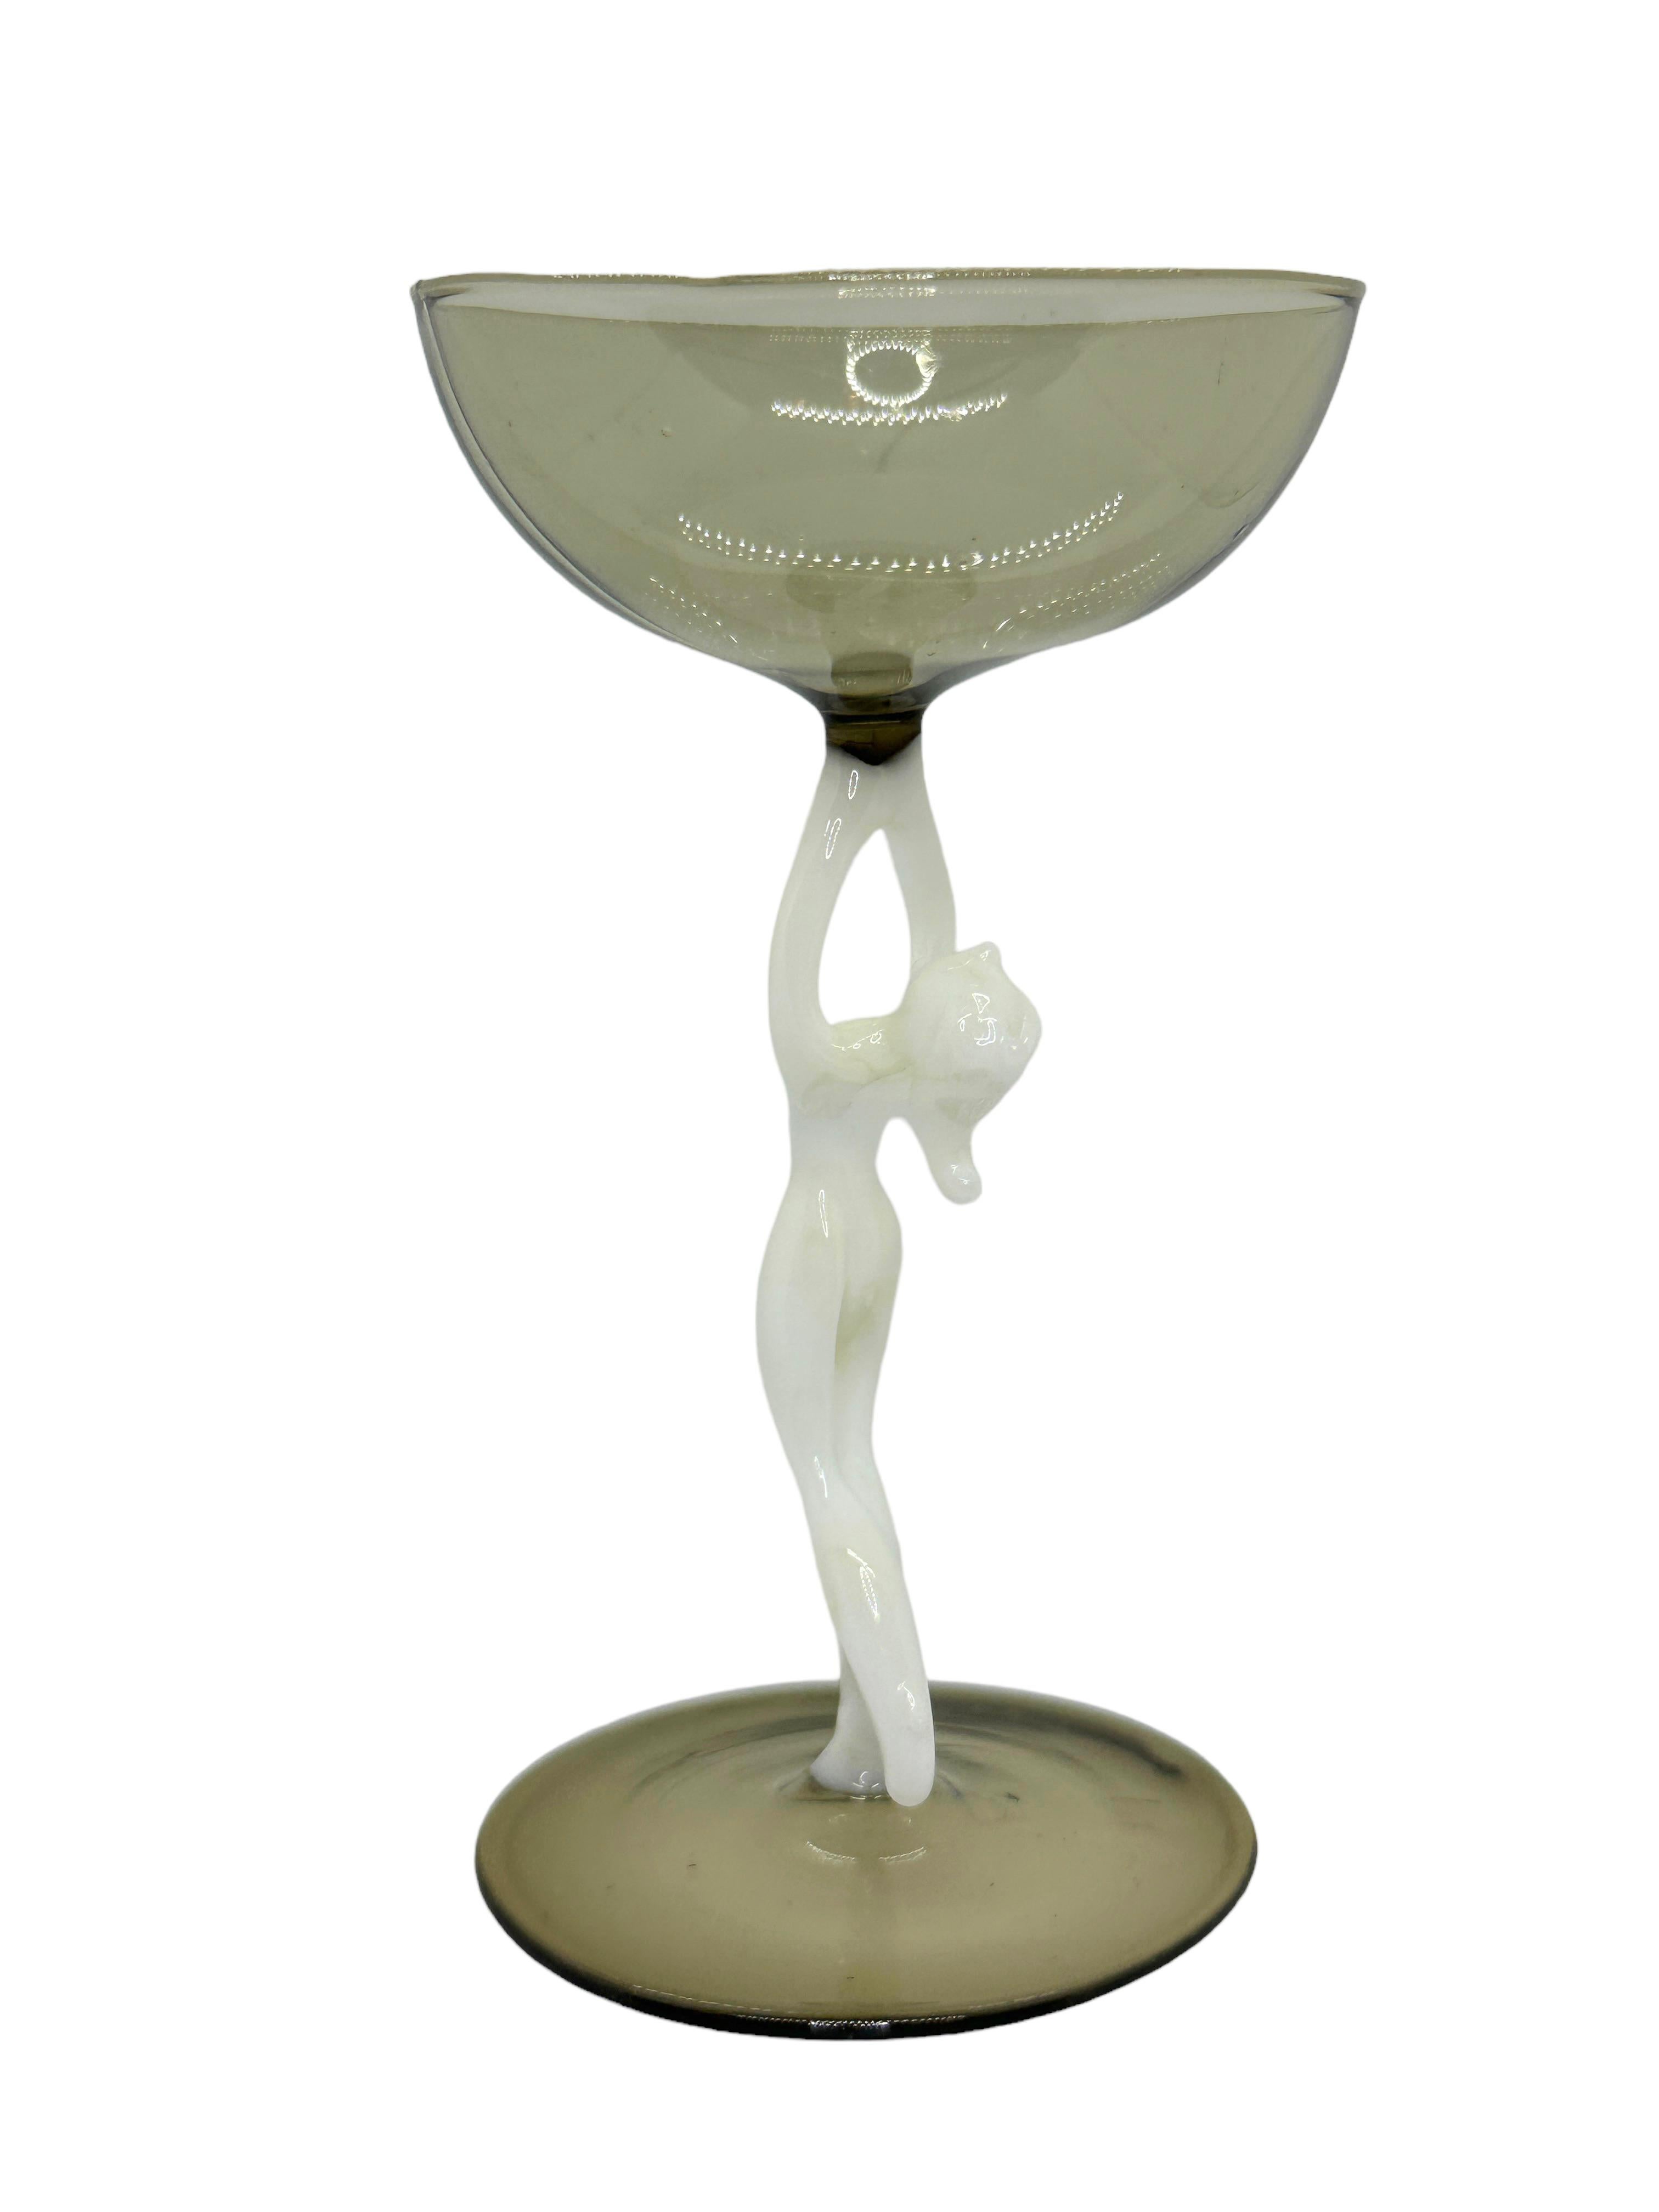 This is a beautiful single vintage stemmed liqueur glass from Austria. It features a bare women's shaft and is Bimini art style. The glass has a wonderful design, the stem depicts a nude lady in white color. The base and the top is a beautiful